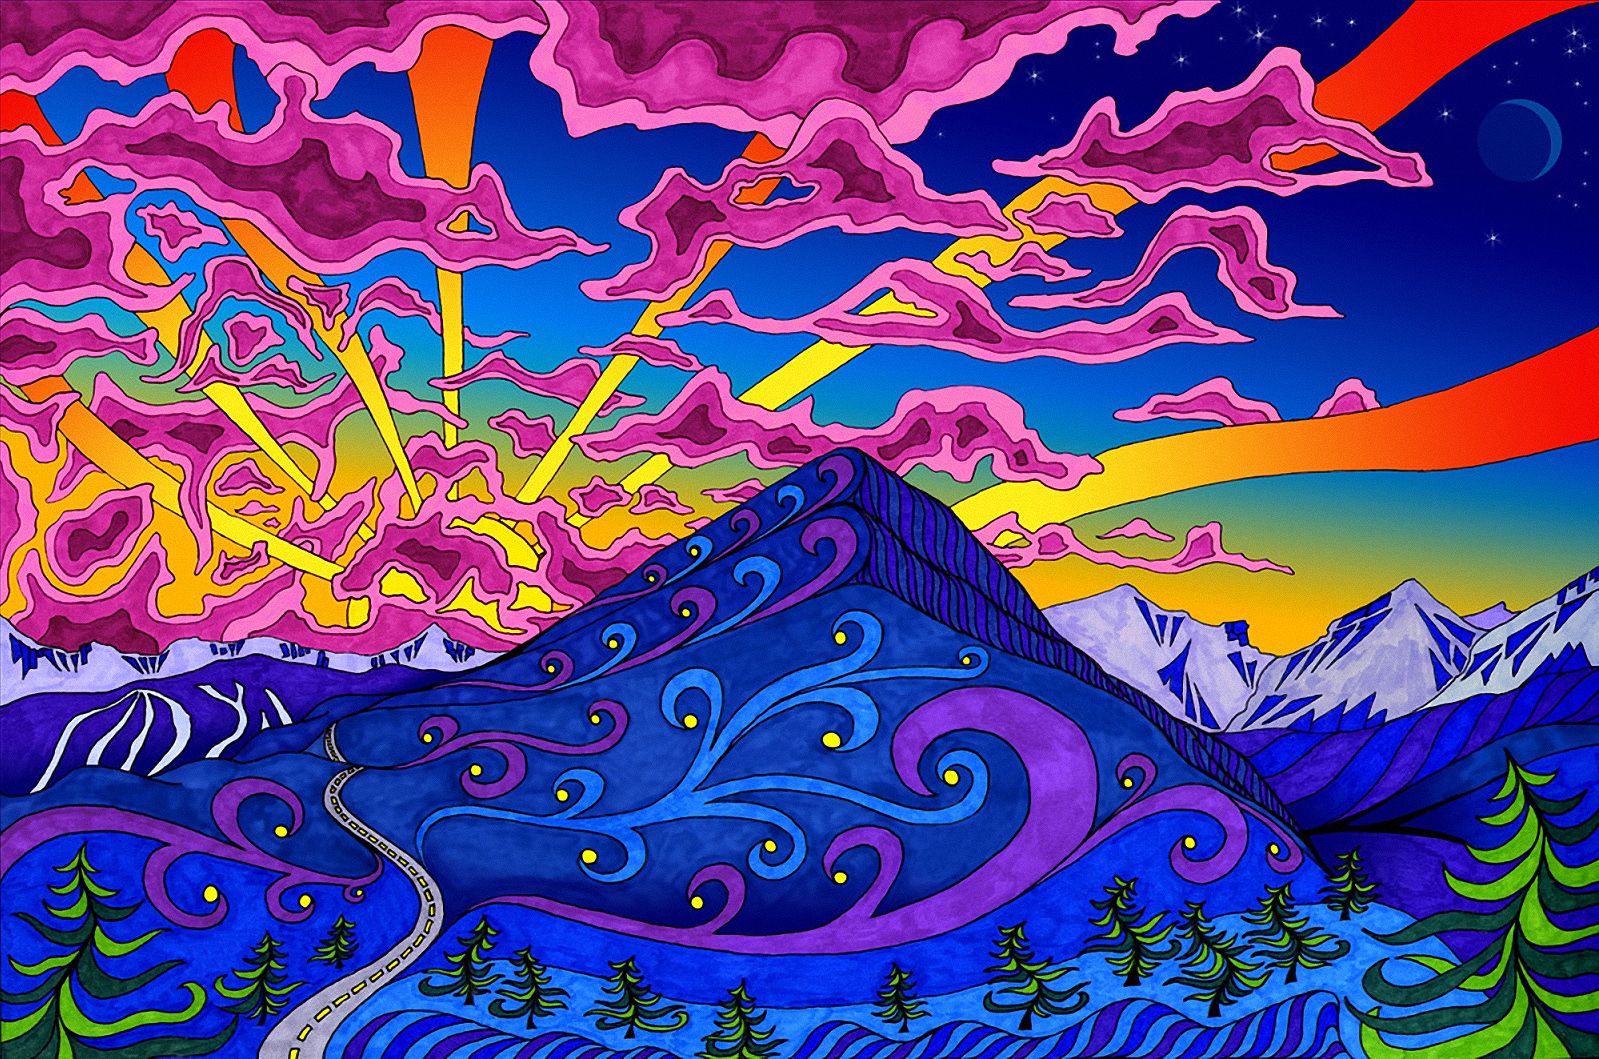 520 Psychedelic HD Wallpapers | Backgrounds - Wallpaper Abyss - Page 2